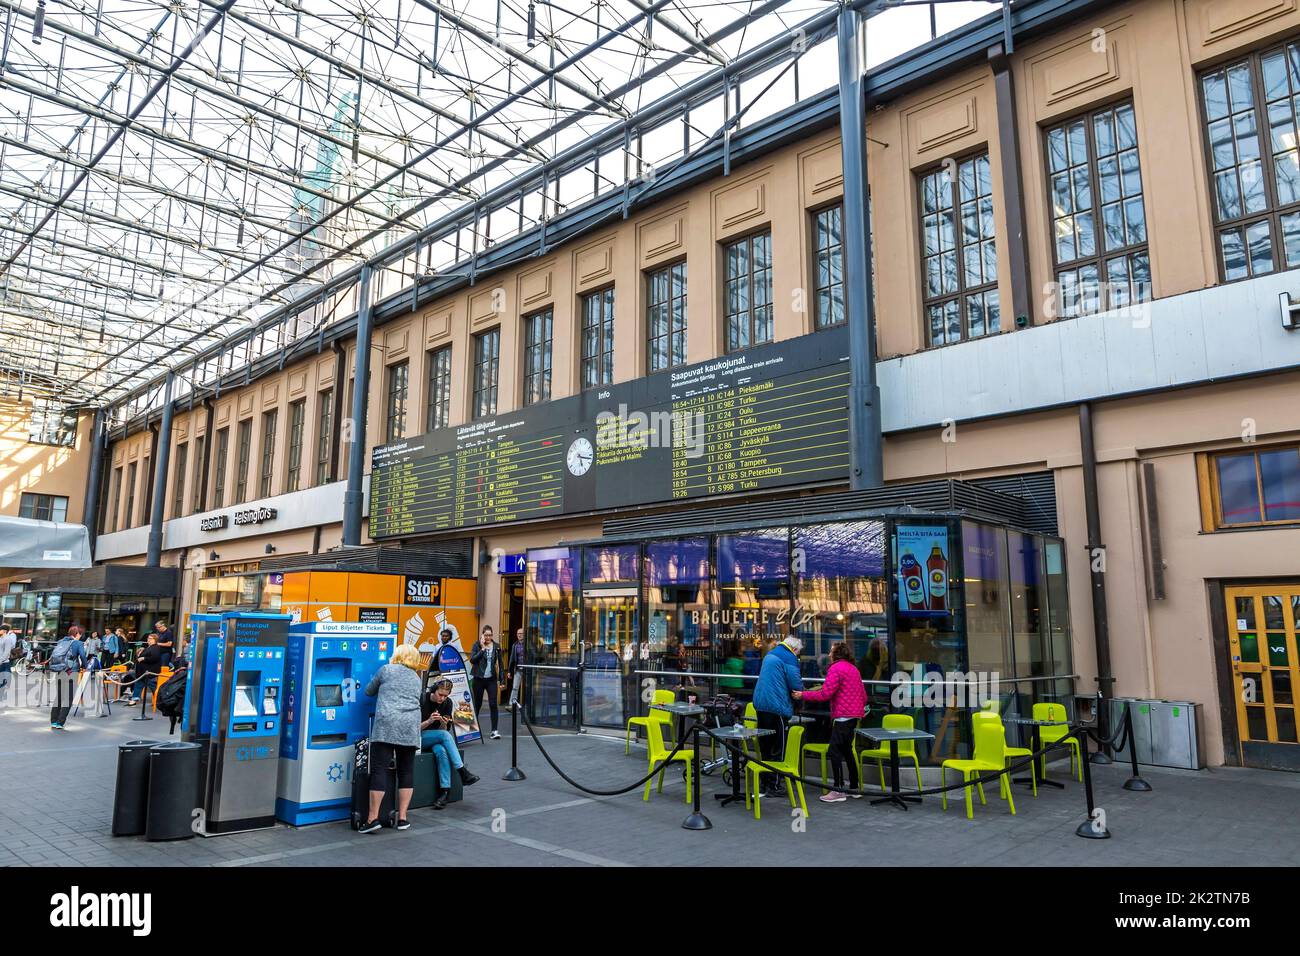 Helsinki, Finland - September 3, 2019: Main hall and online arrival and departure board of Helsinki Central Station (Finnish: Helsingin paarautatiease Stock Photo